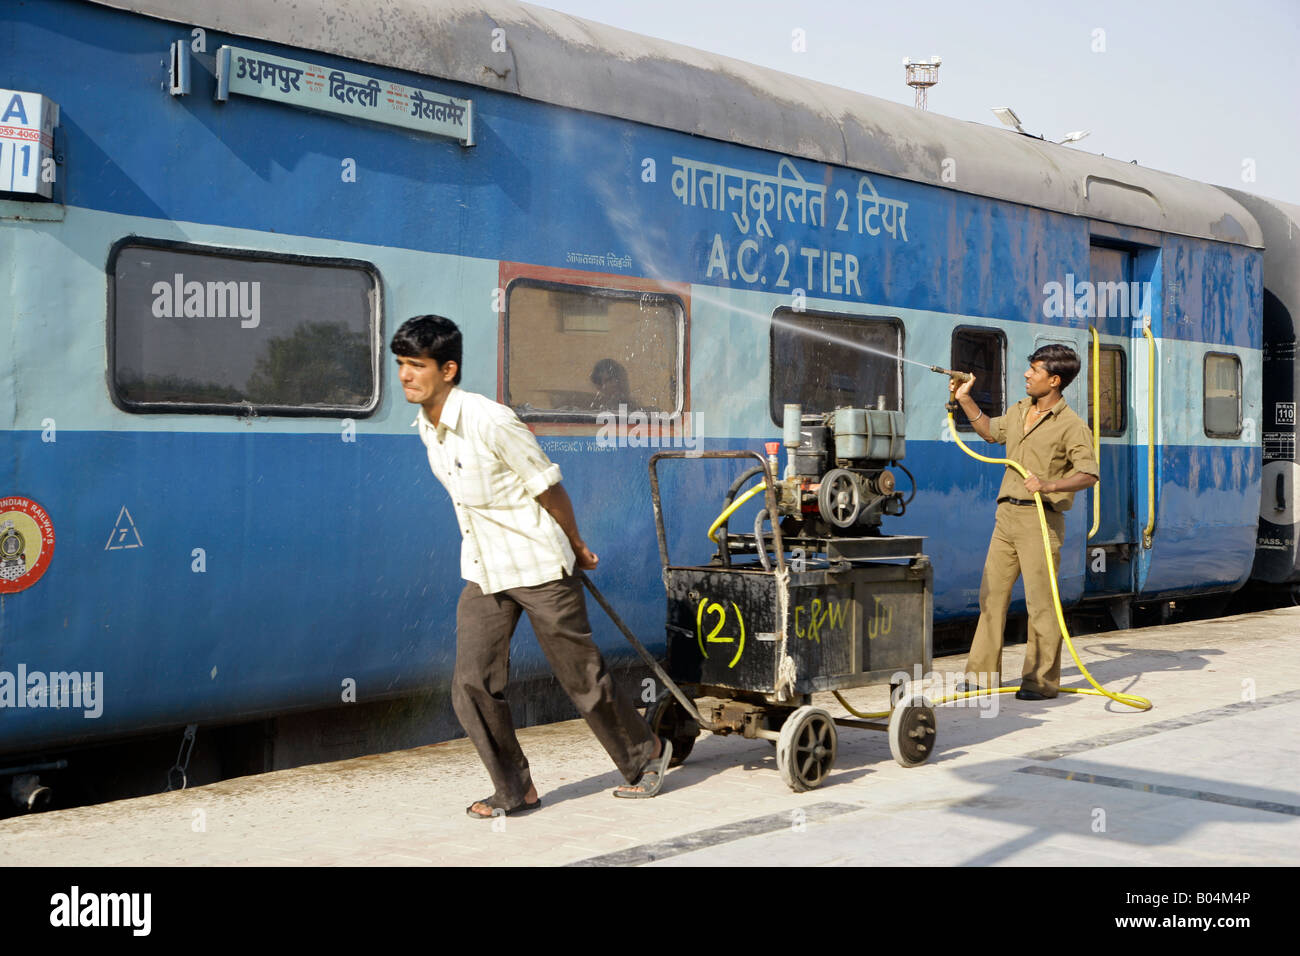 Railwaymen cleaning train carriages, Jaiselmer, Rajasthan, India Stock Photo